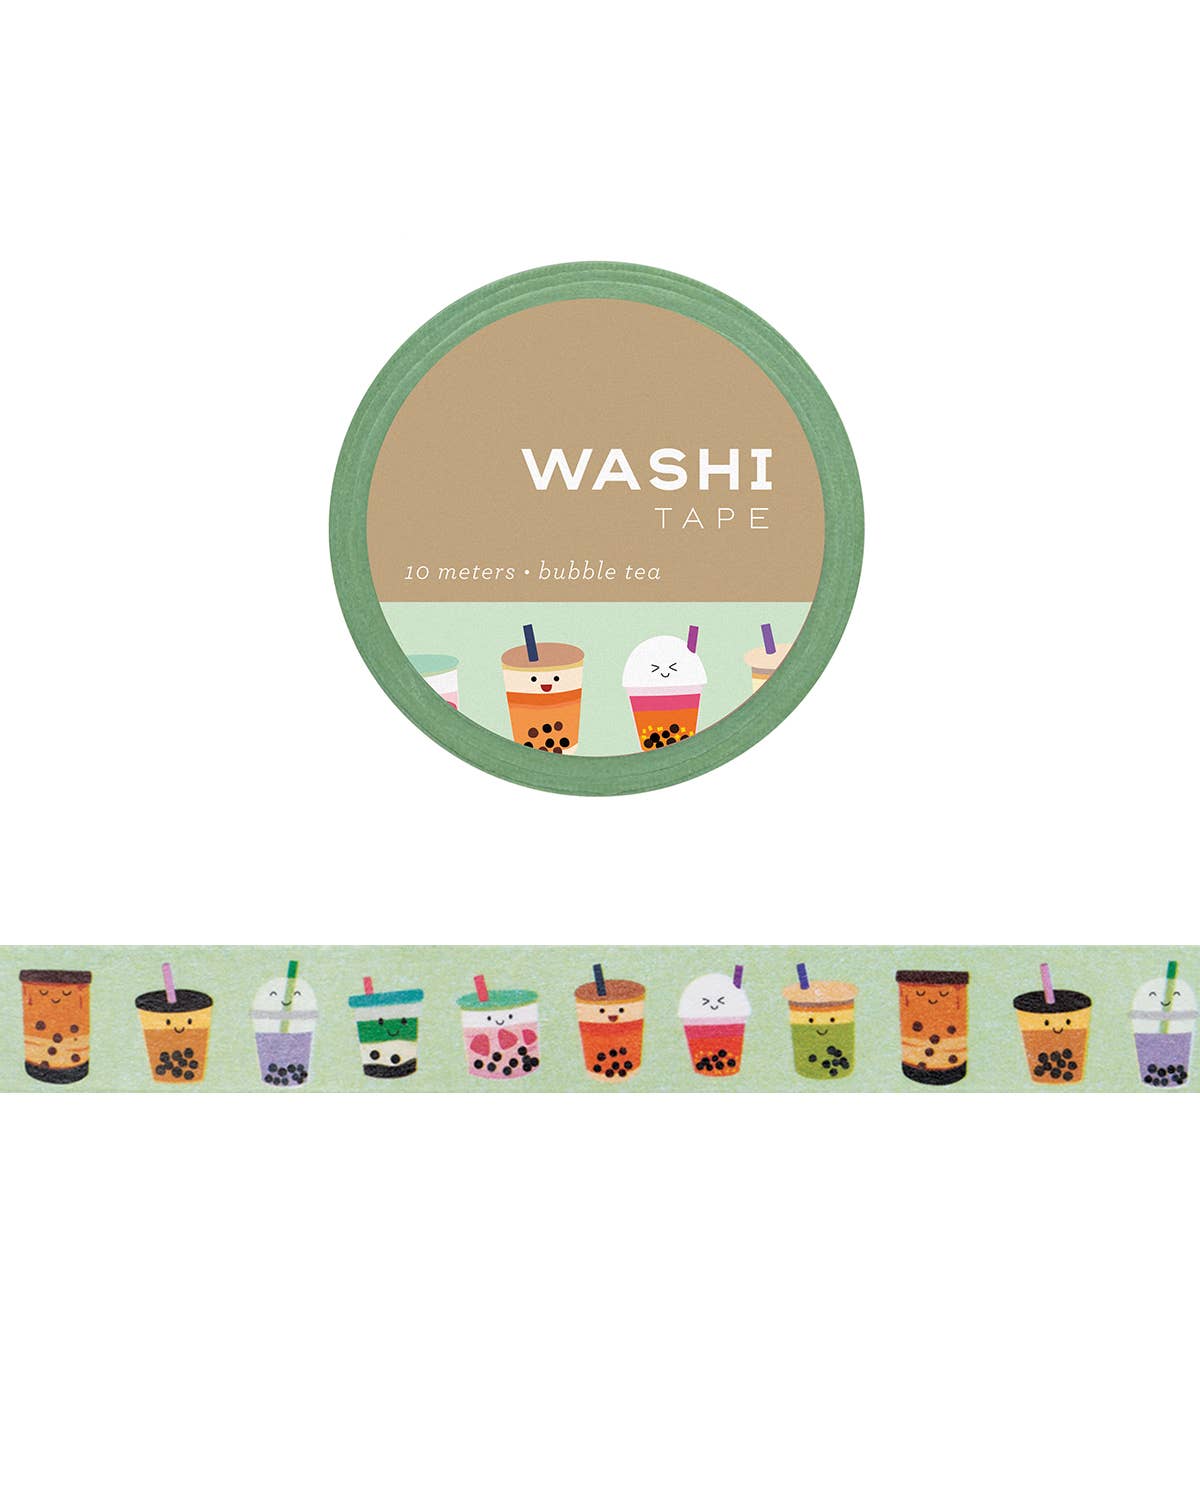 Decorative washi tape with various kinds of bubble tea/boba drinks on it 